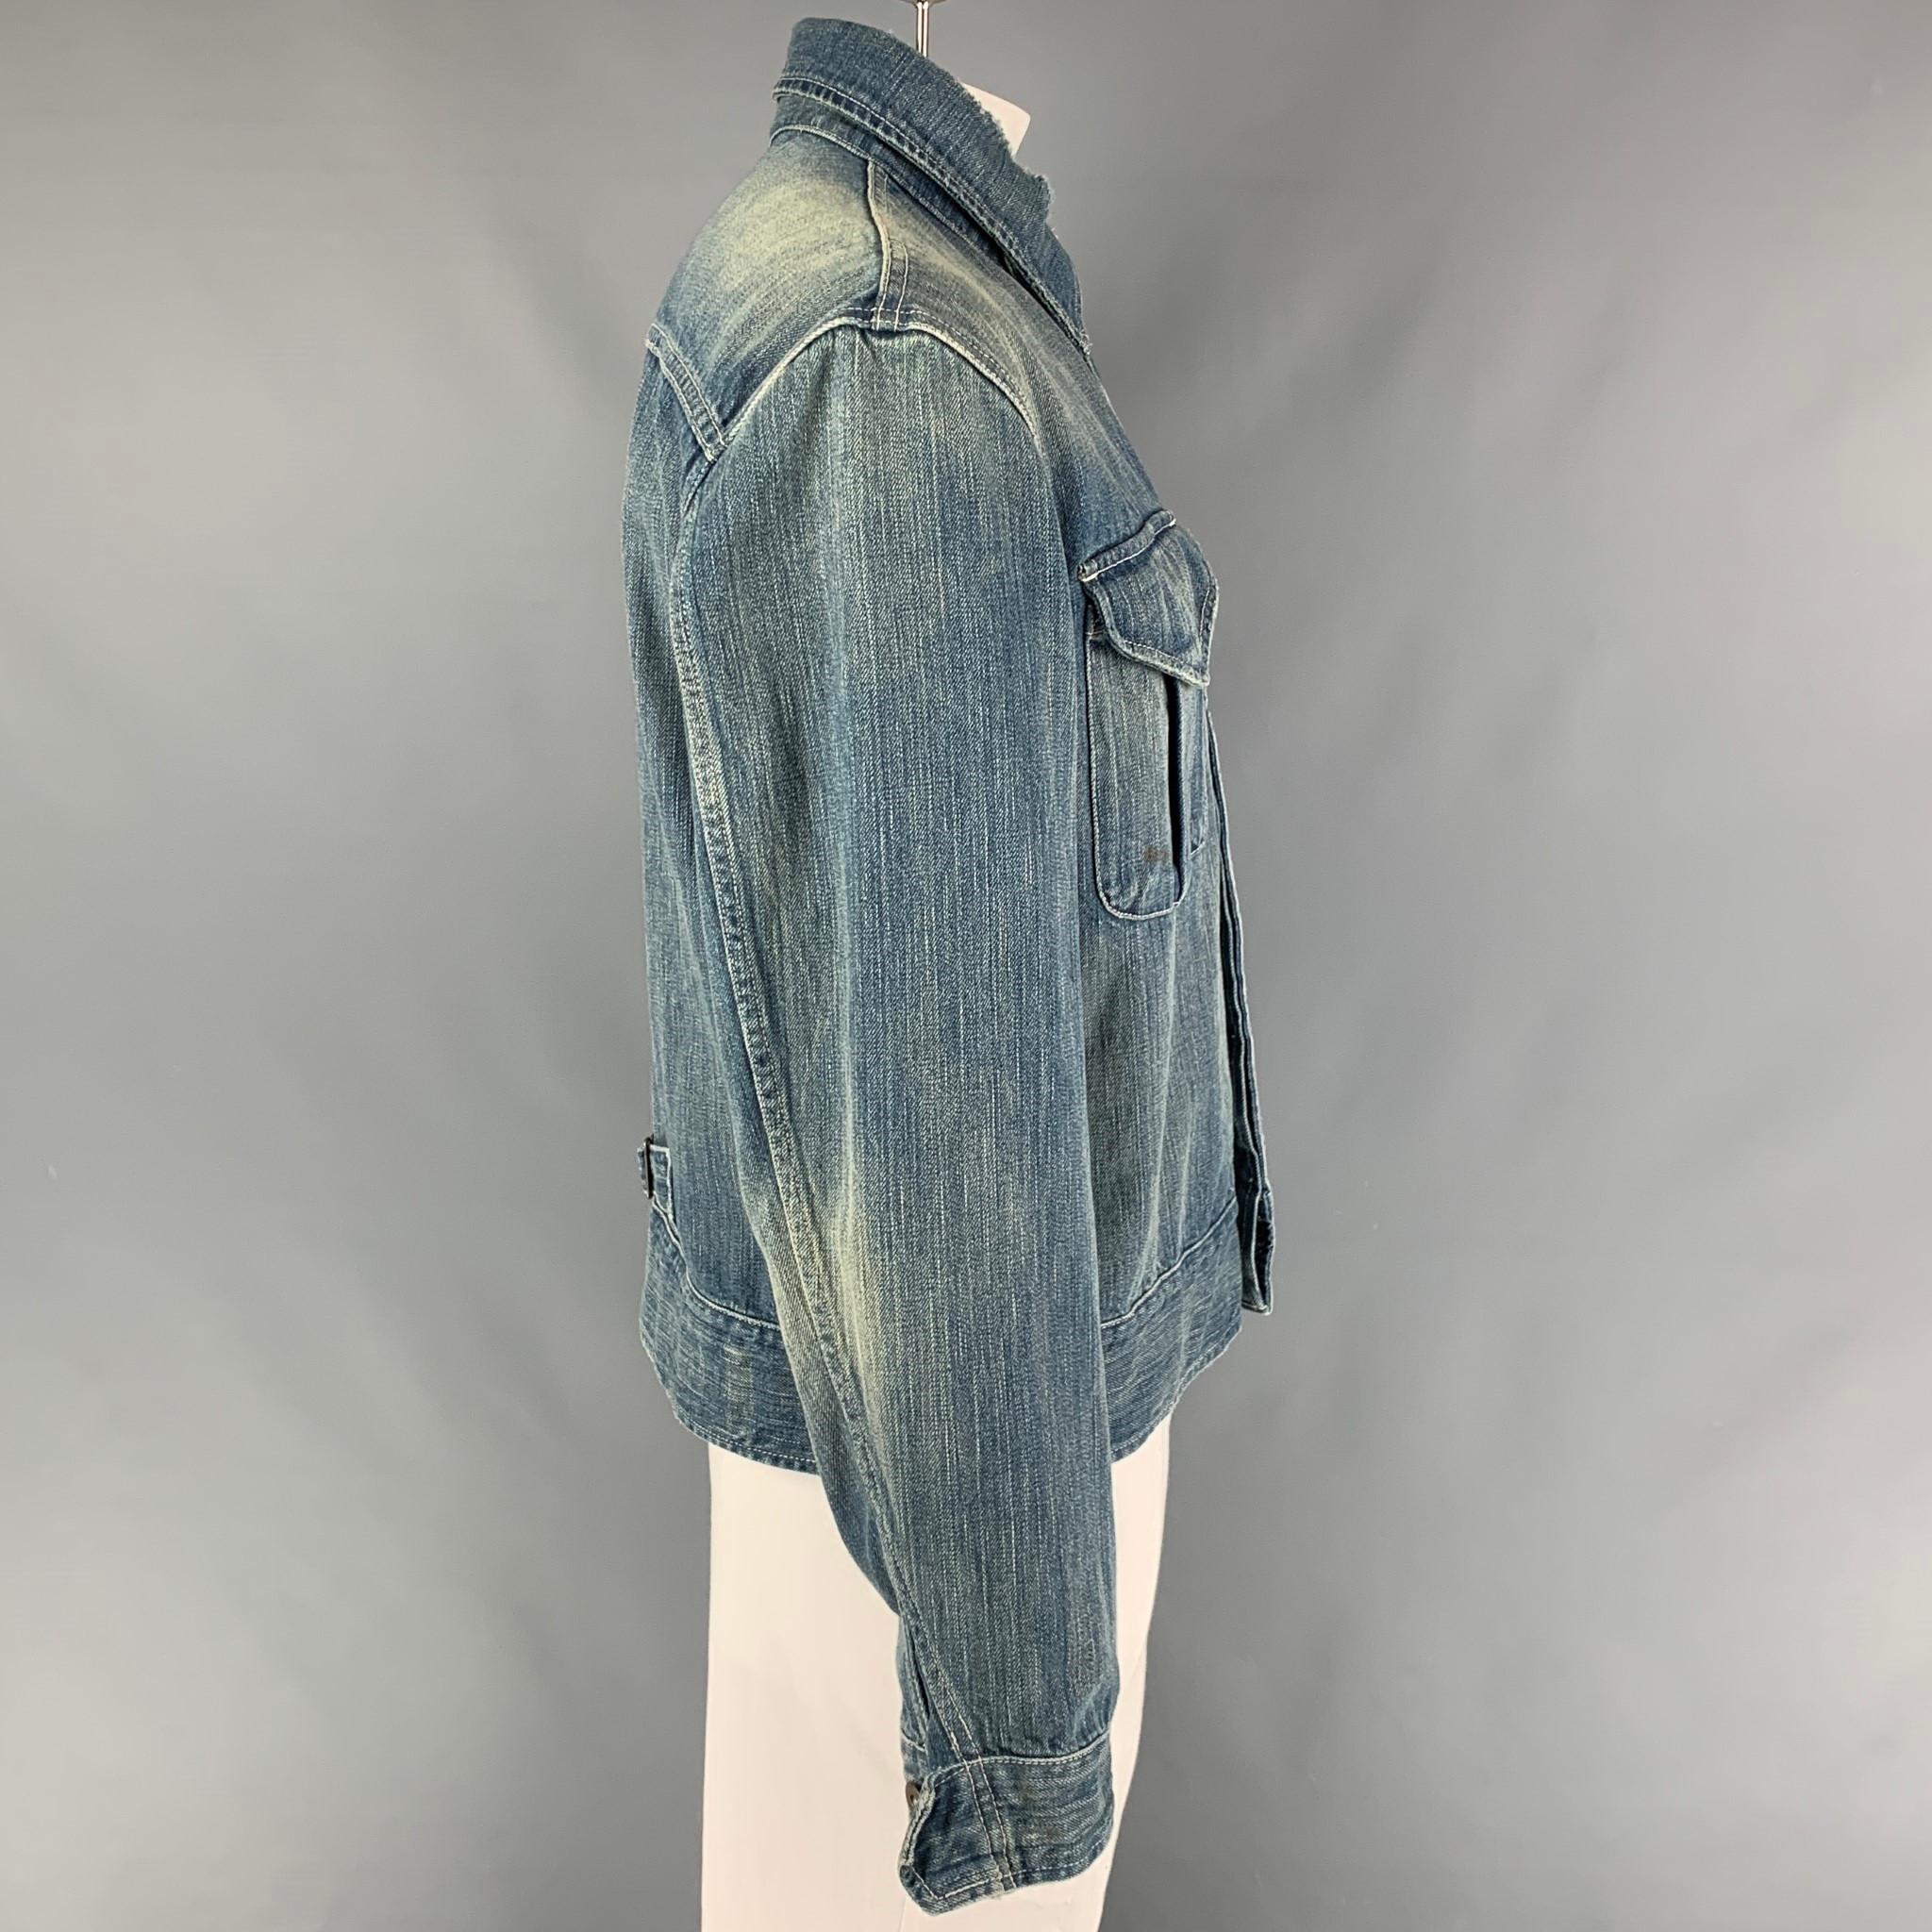 RRL by RALPH LAUREN jacket comes in a blue distressed cotton featuring two large front pockets, spread collar, contrast stitching, back strap detail, and a hidden placket closure. 

Very Good Pre-Owned Condition. Light marks at front.
Marked: